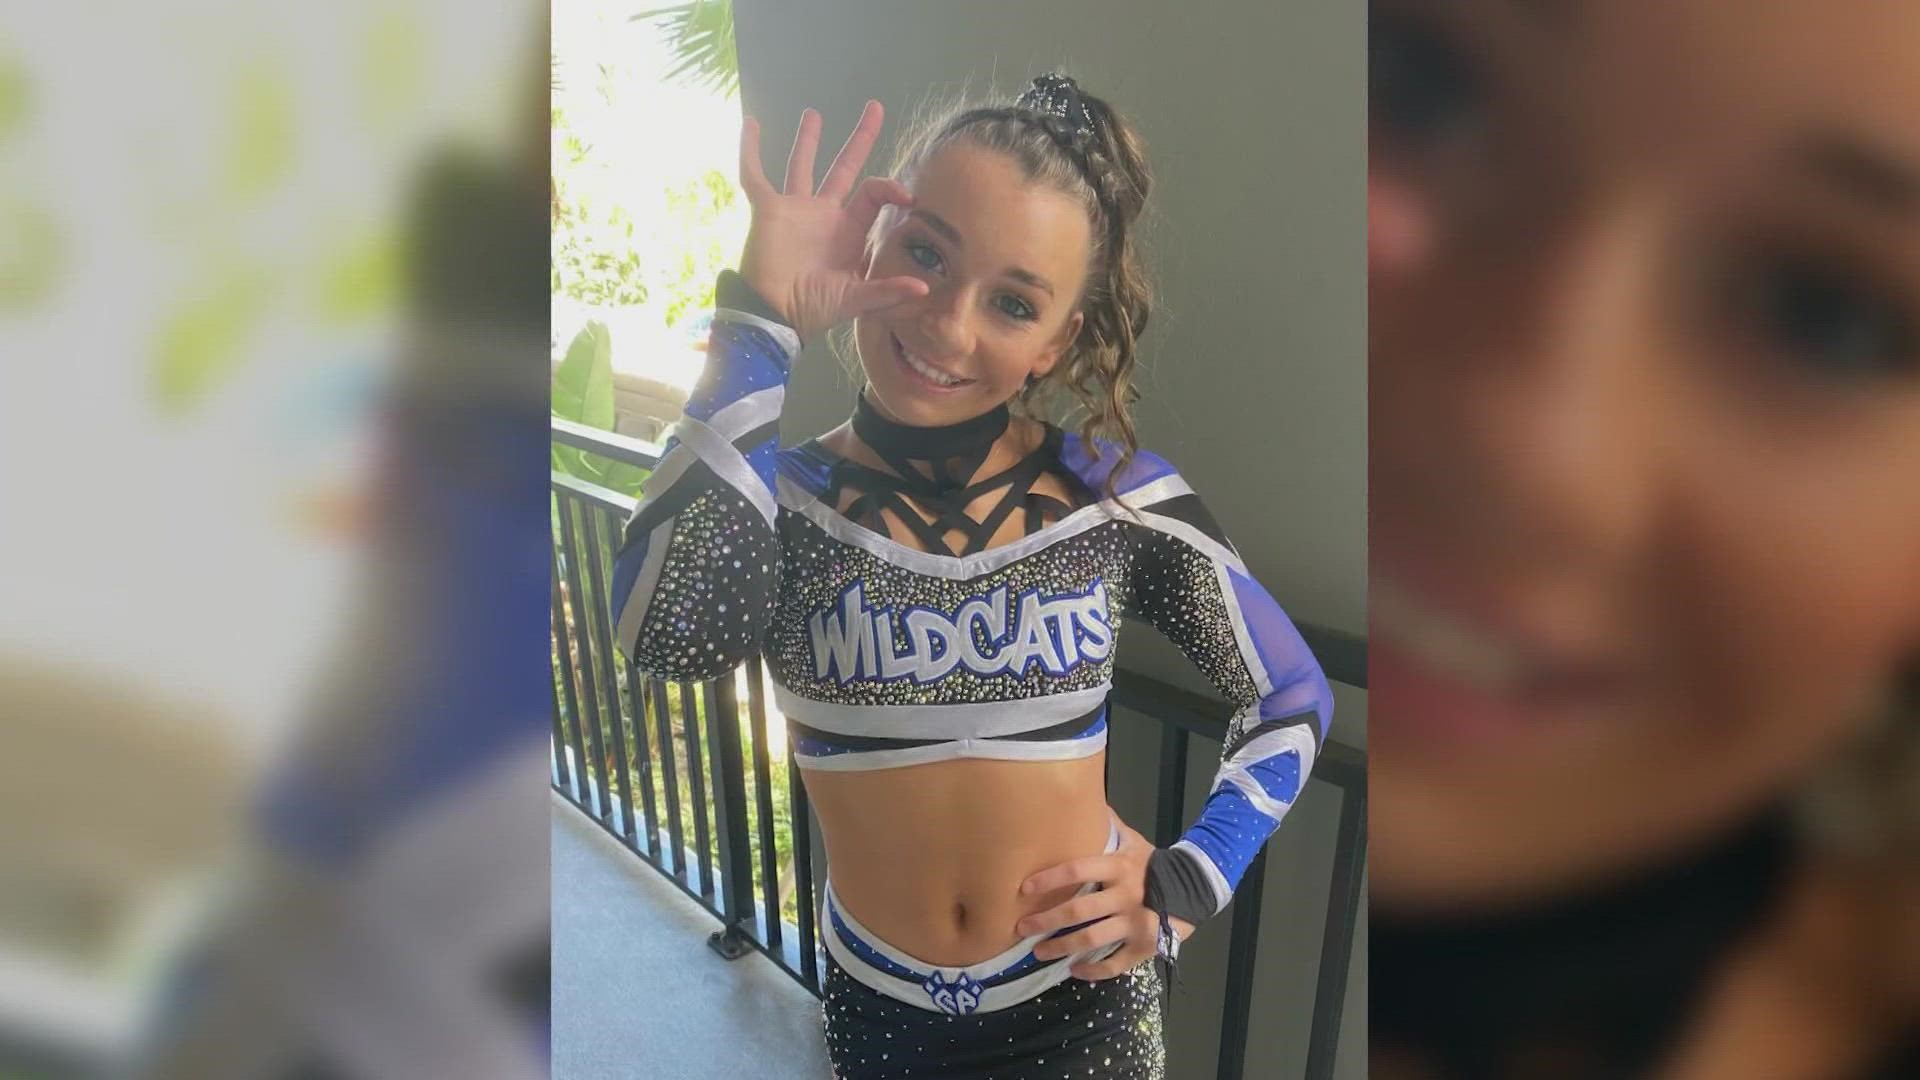 Haylee Alexander, 15, suffered a traumatic brain injury at competitive cheer practice in Plano earlier this week.